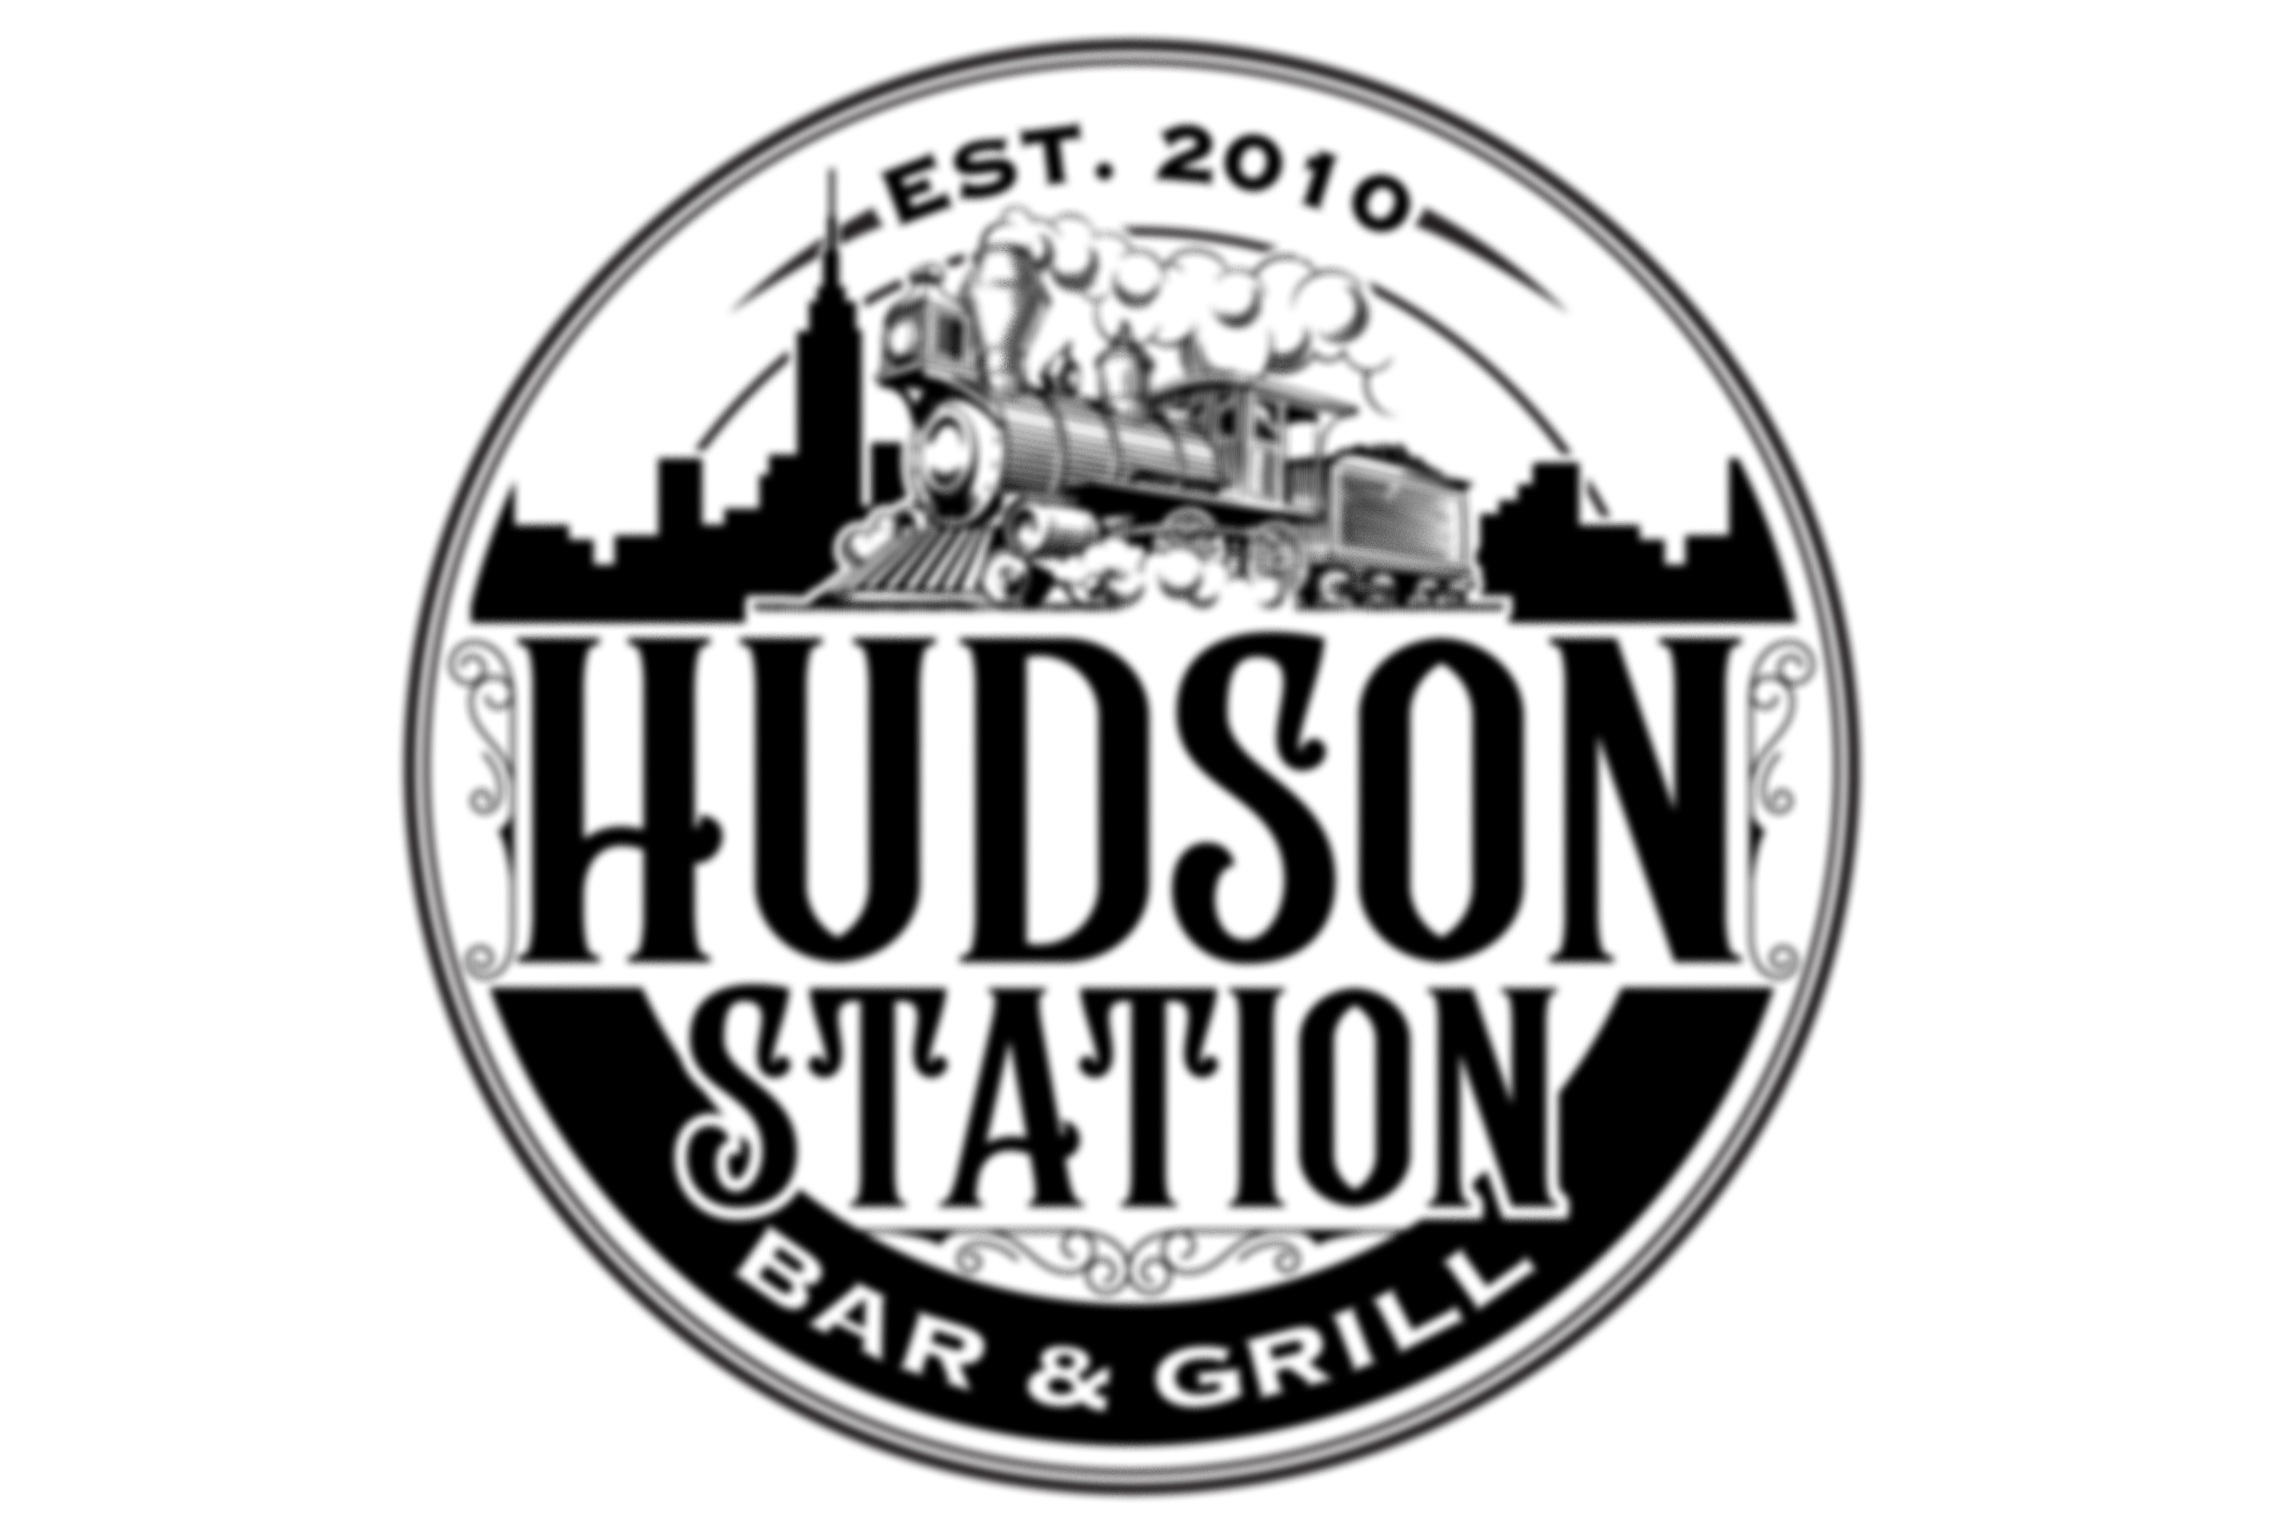 Restaurant Cleaners, cleaning services, professional cleaners, Cleaners NYC, Hudson Station, Hudson Station Bar and Grill, Hudson Station Bar & Grill, Midtown, Midtown NYC, Midtown Manhattan